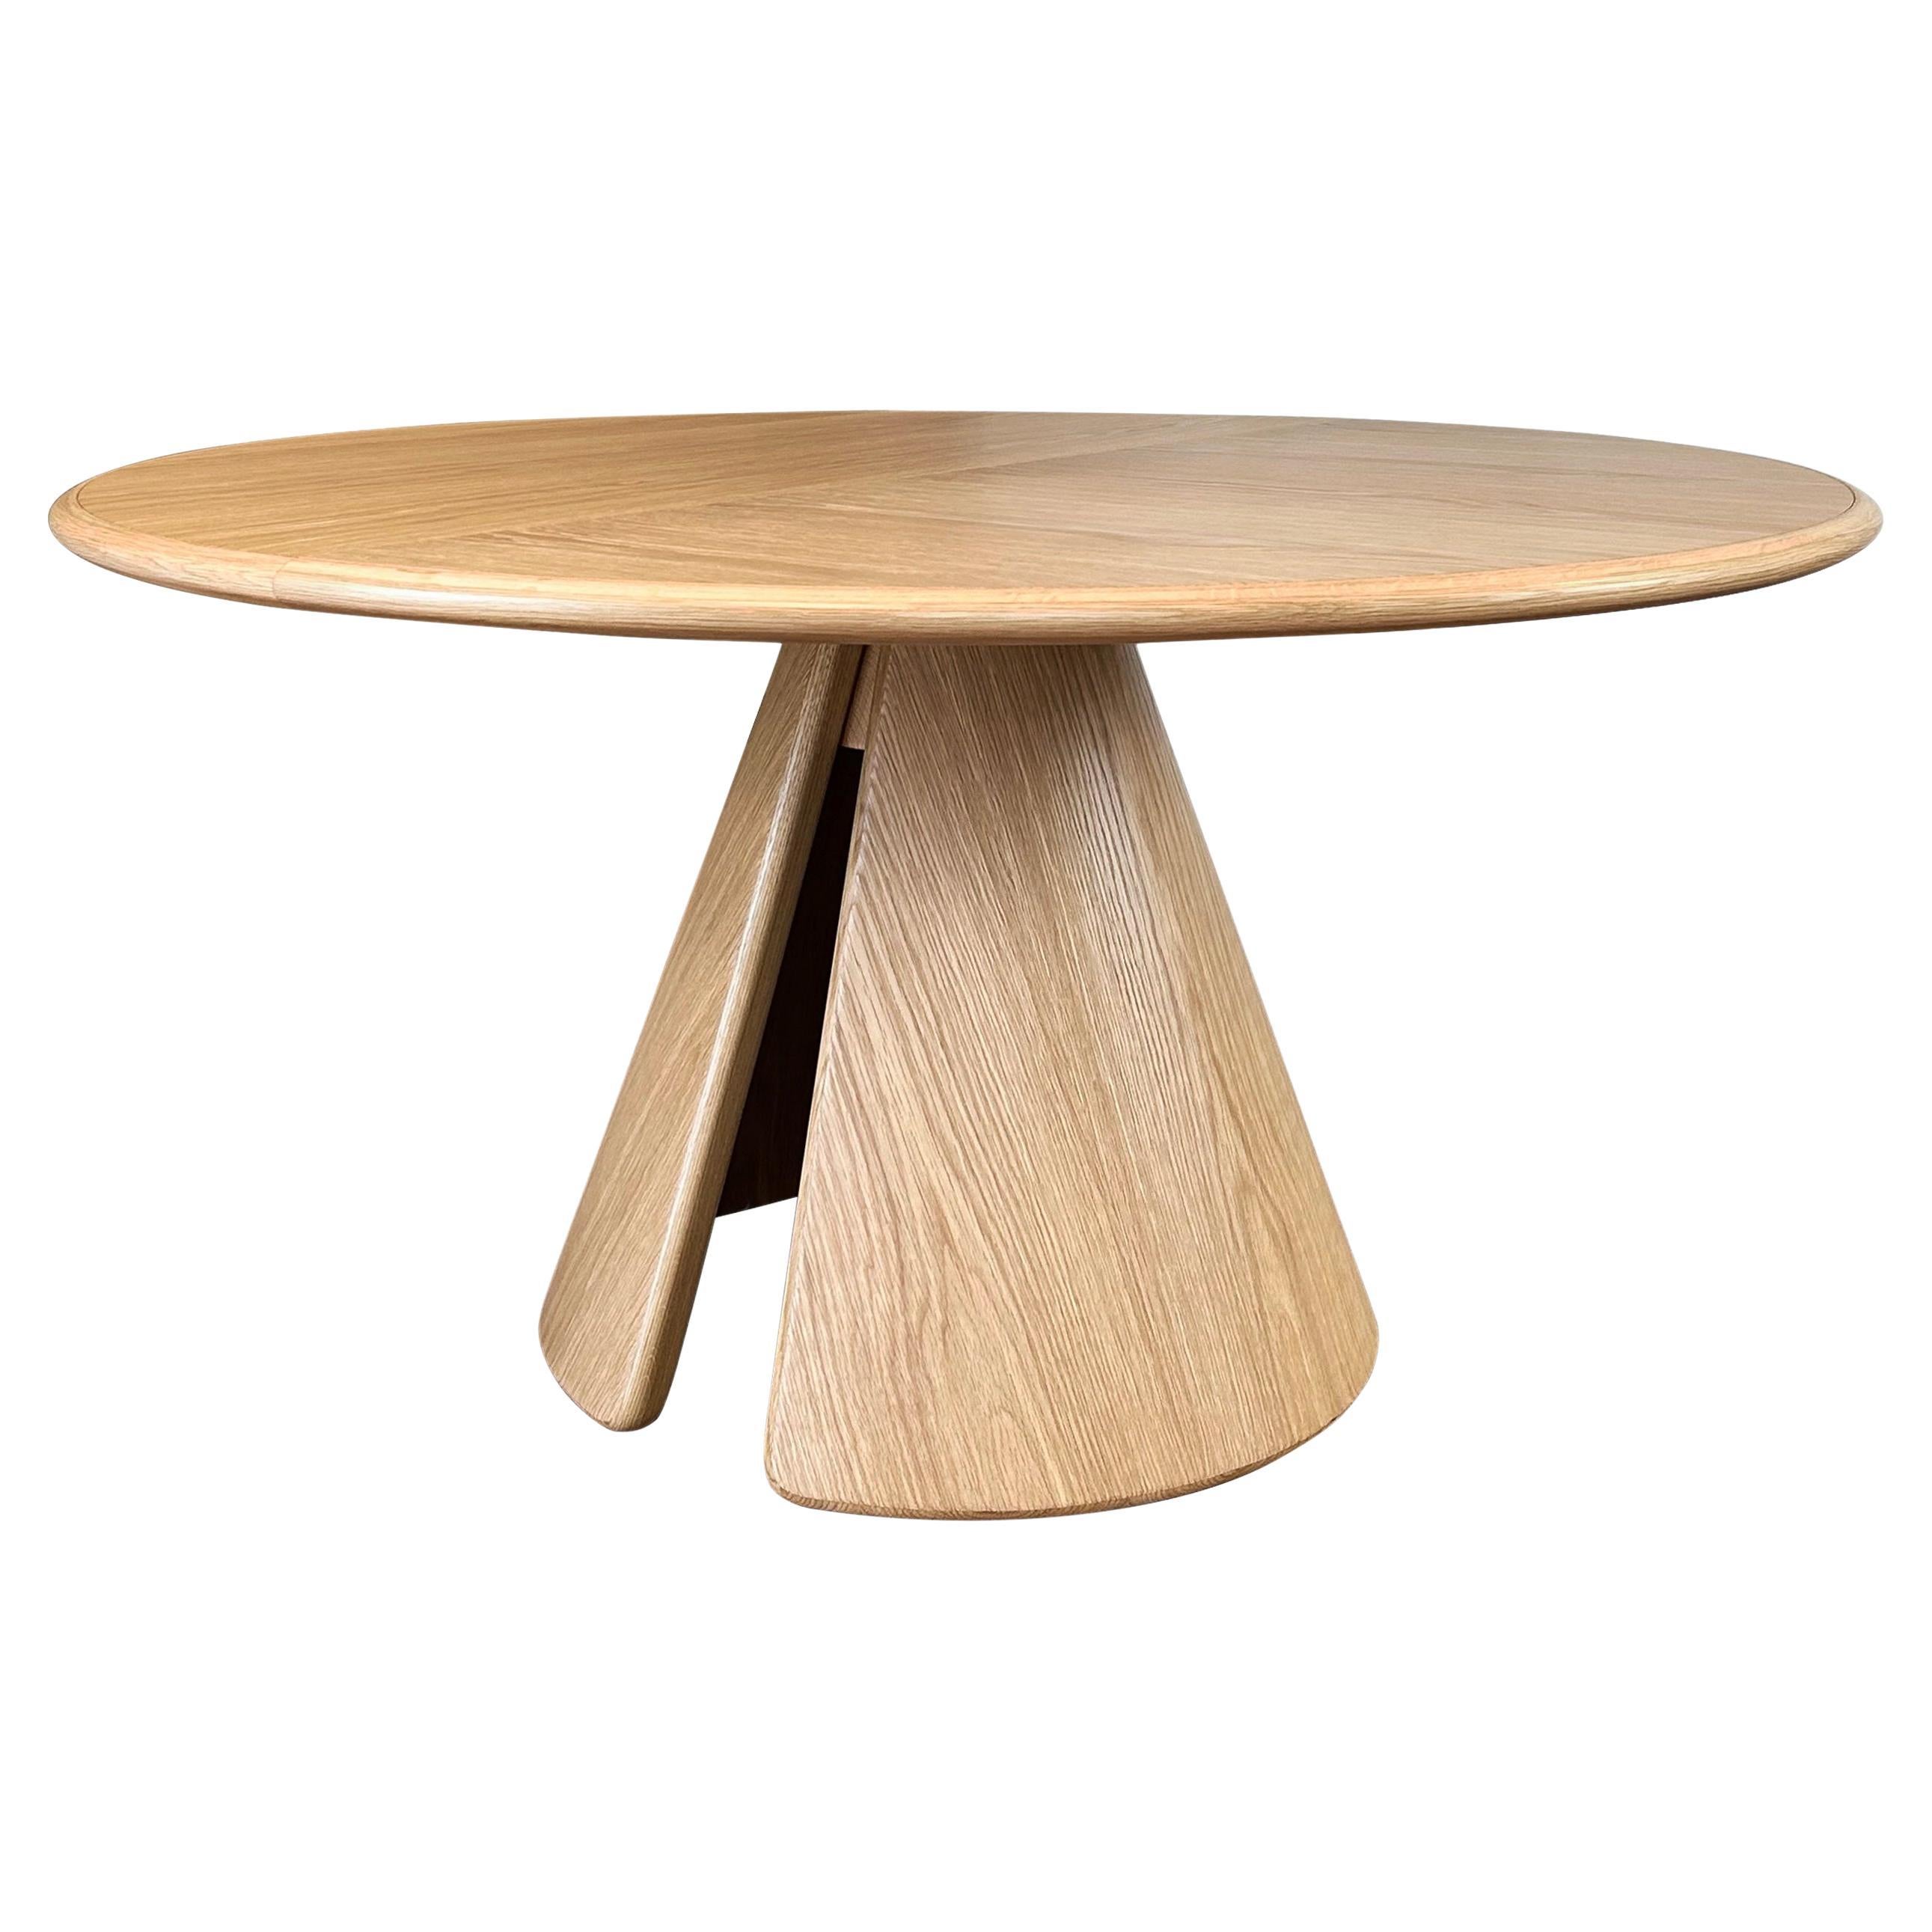 Sama Dining Table, Contemporary Sculptural Round Oak by Fulden Topaloglu For Sale